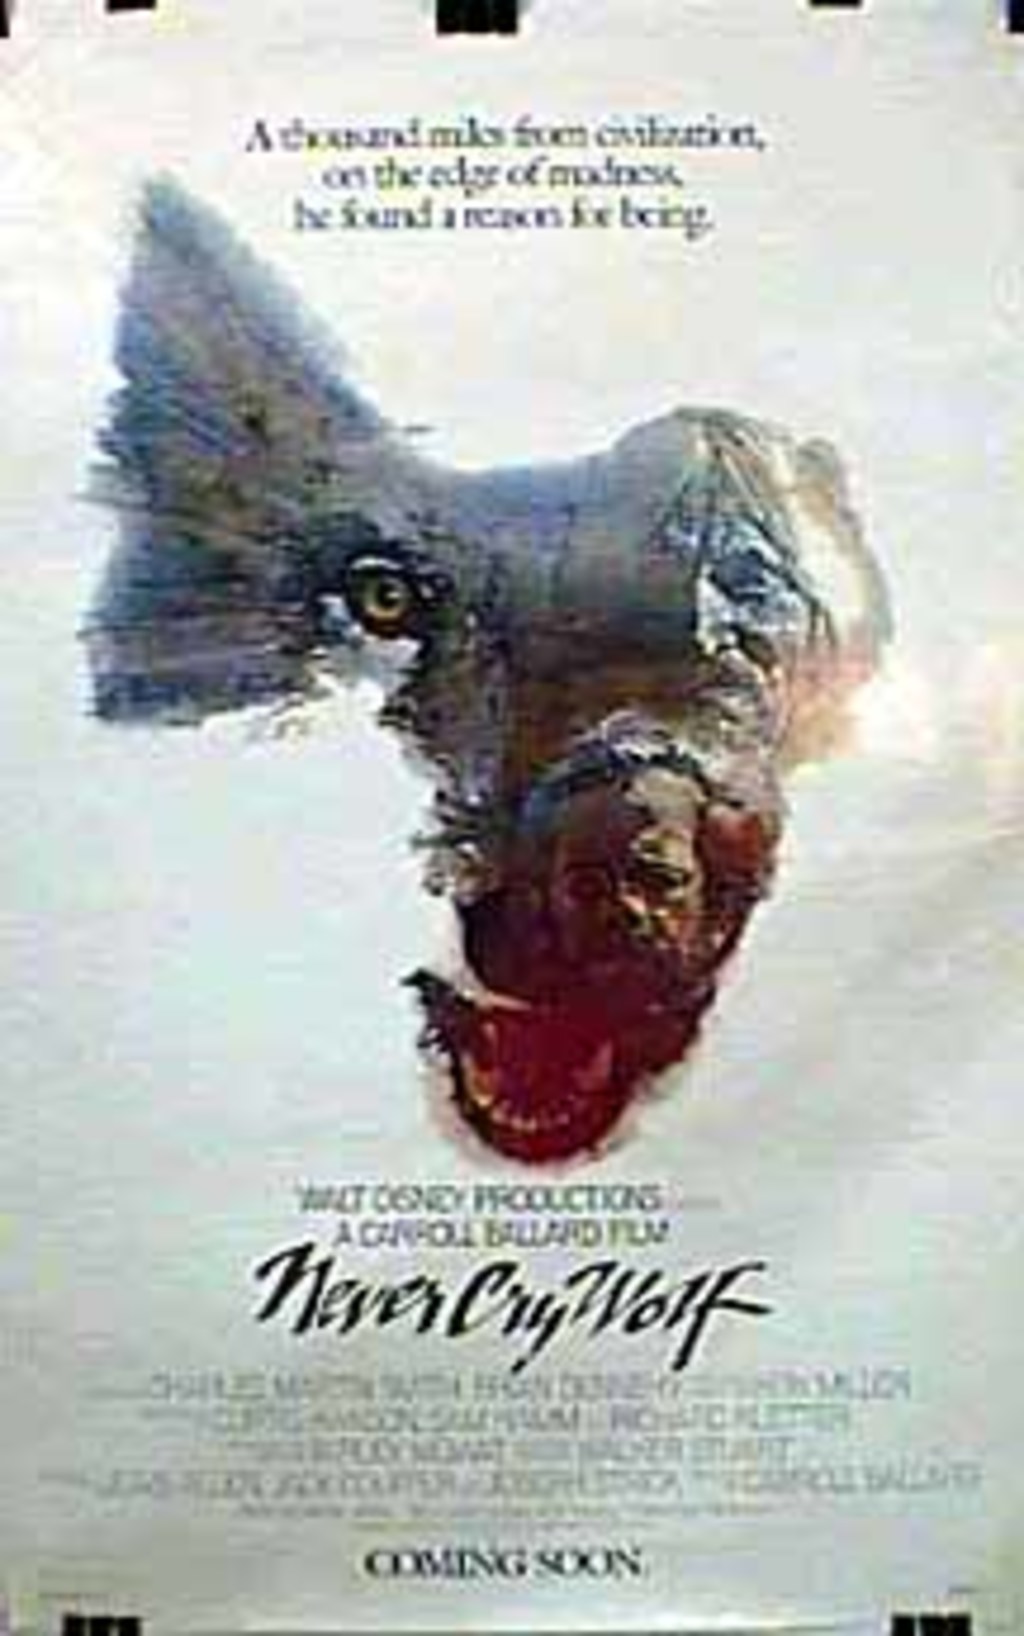 never cry wolf full movie